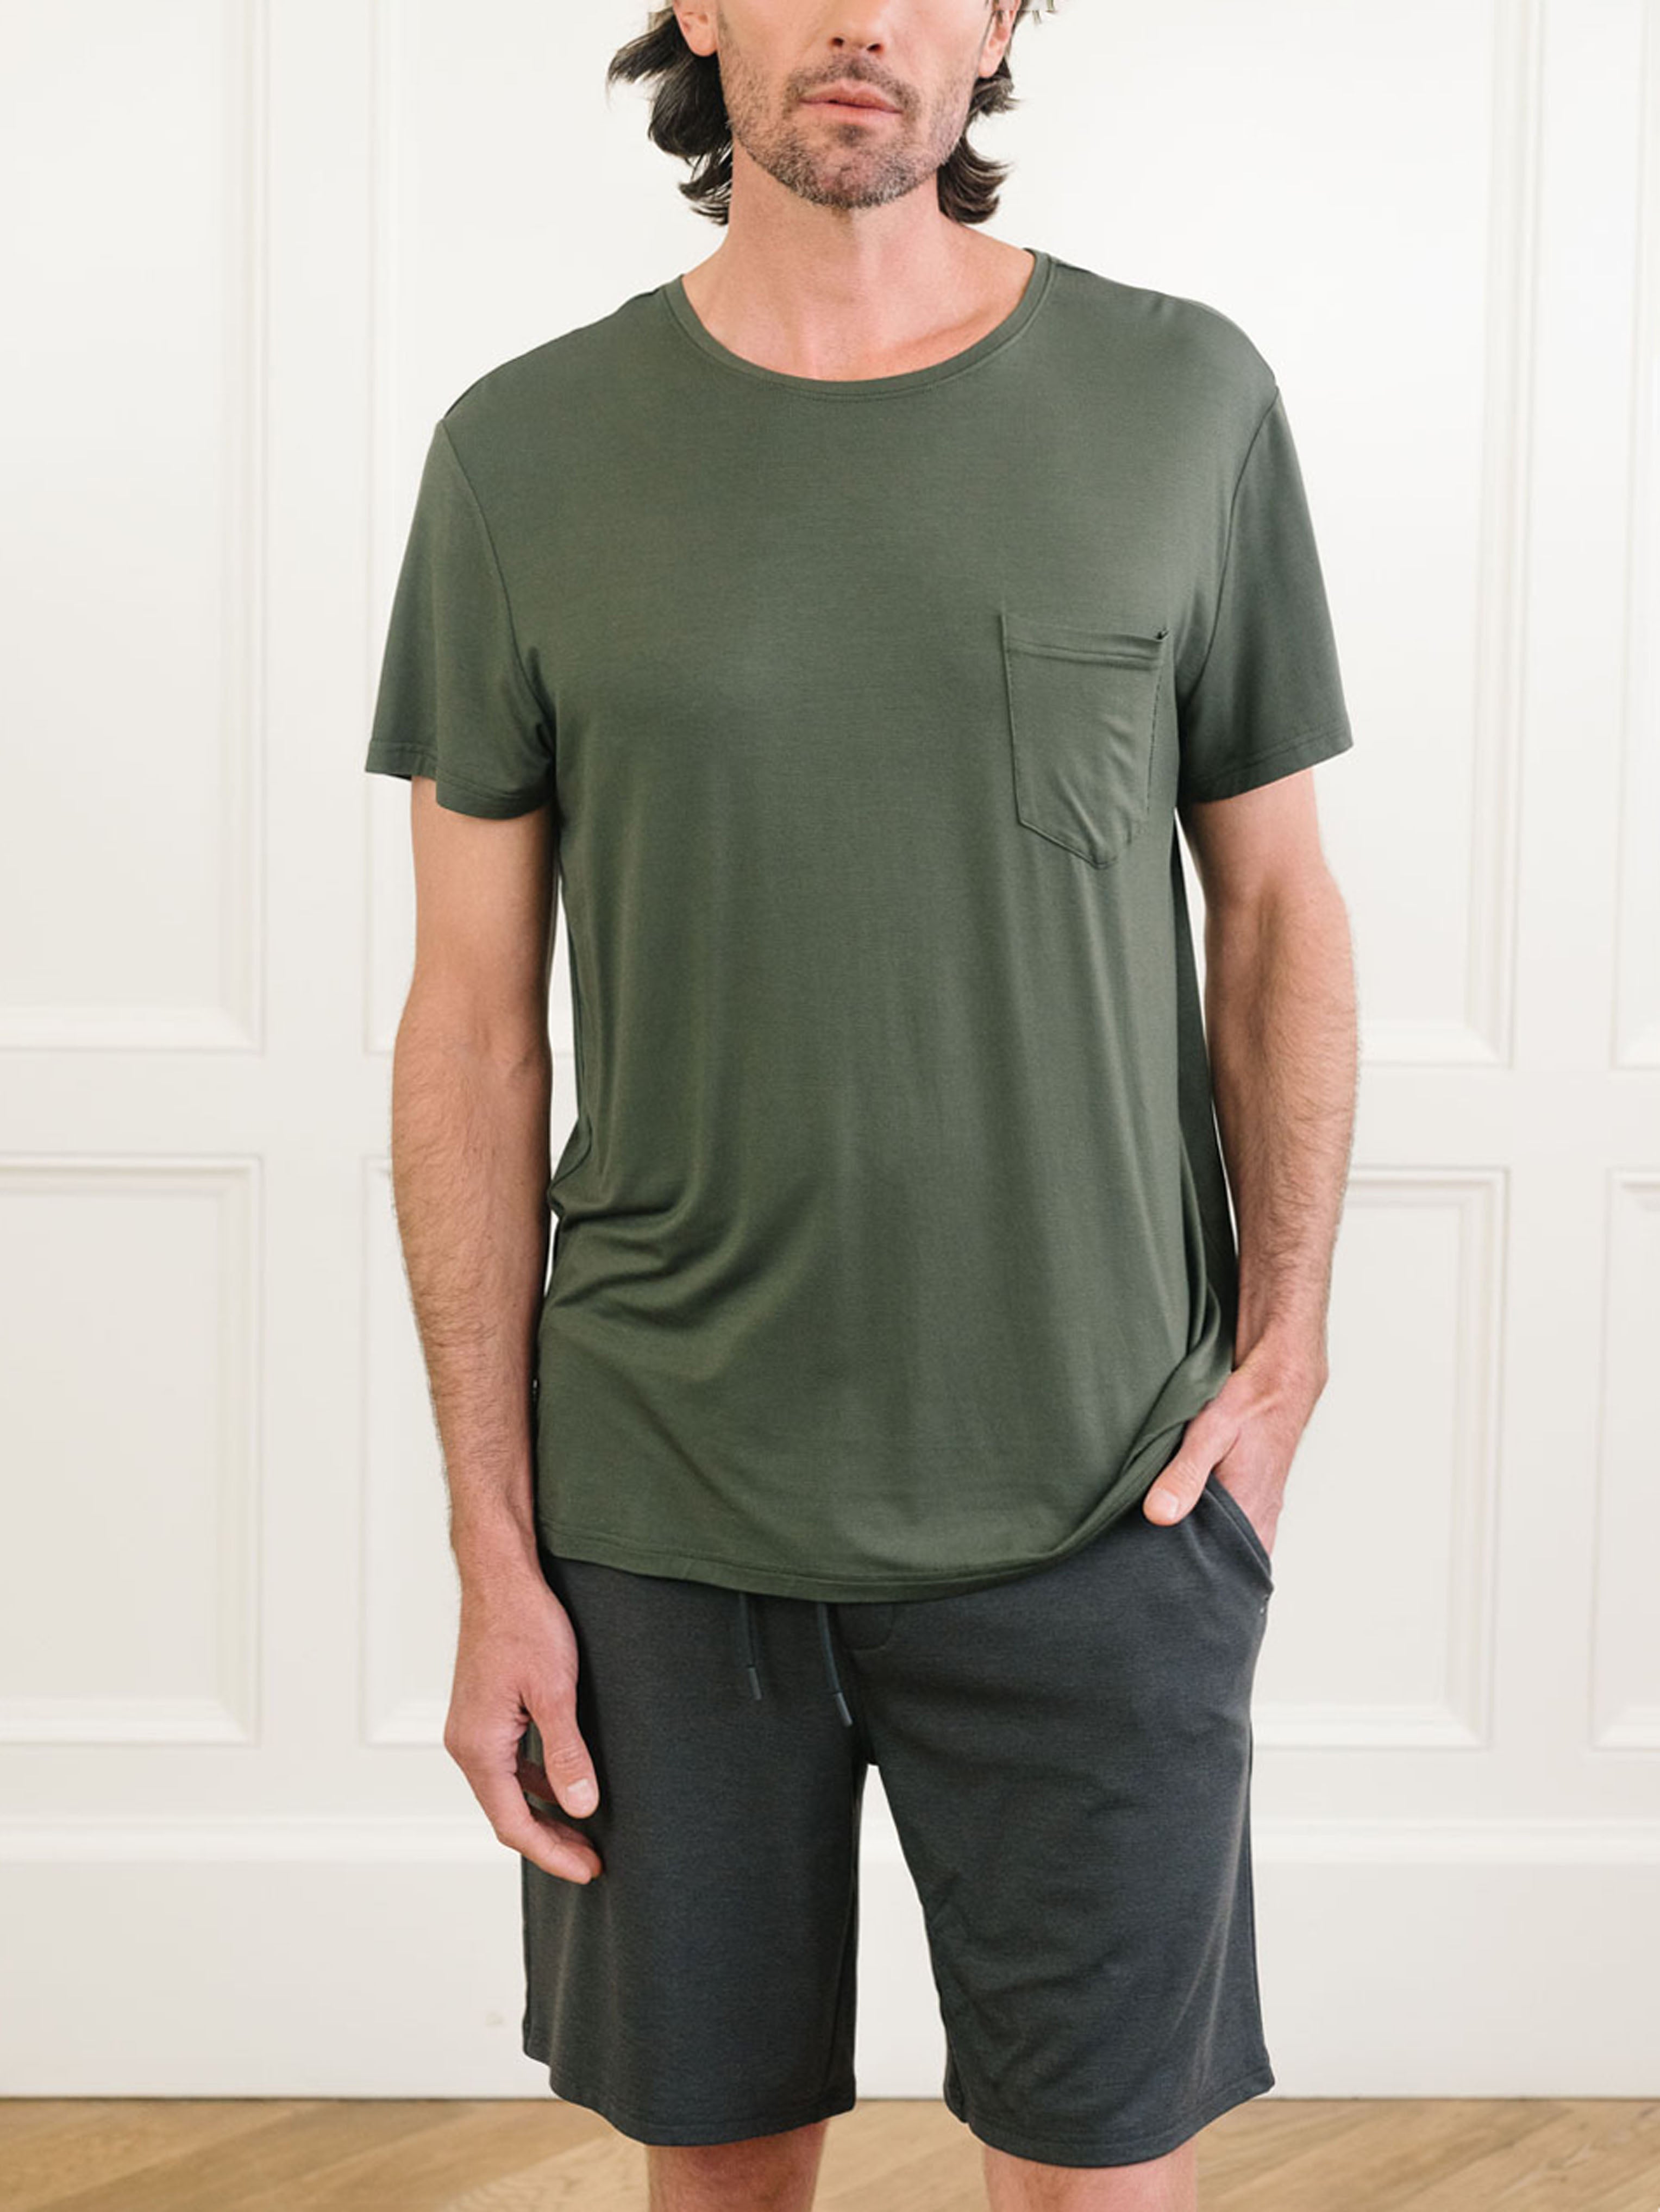 Olive Men's Stretch-Knit Bamboo Lounge Tee. A man is wearing the lounge tee in a well lit home.|Color:Olive